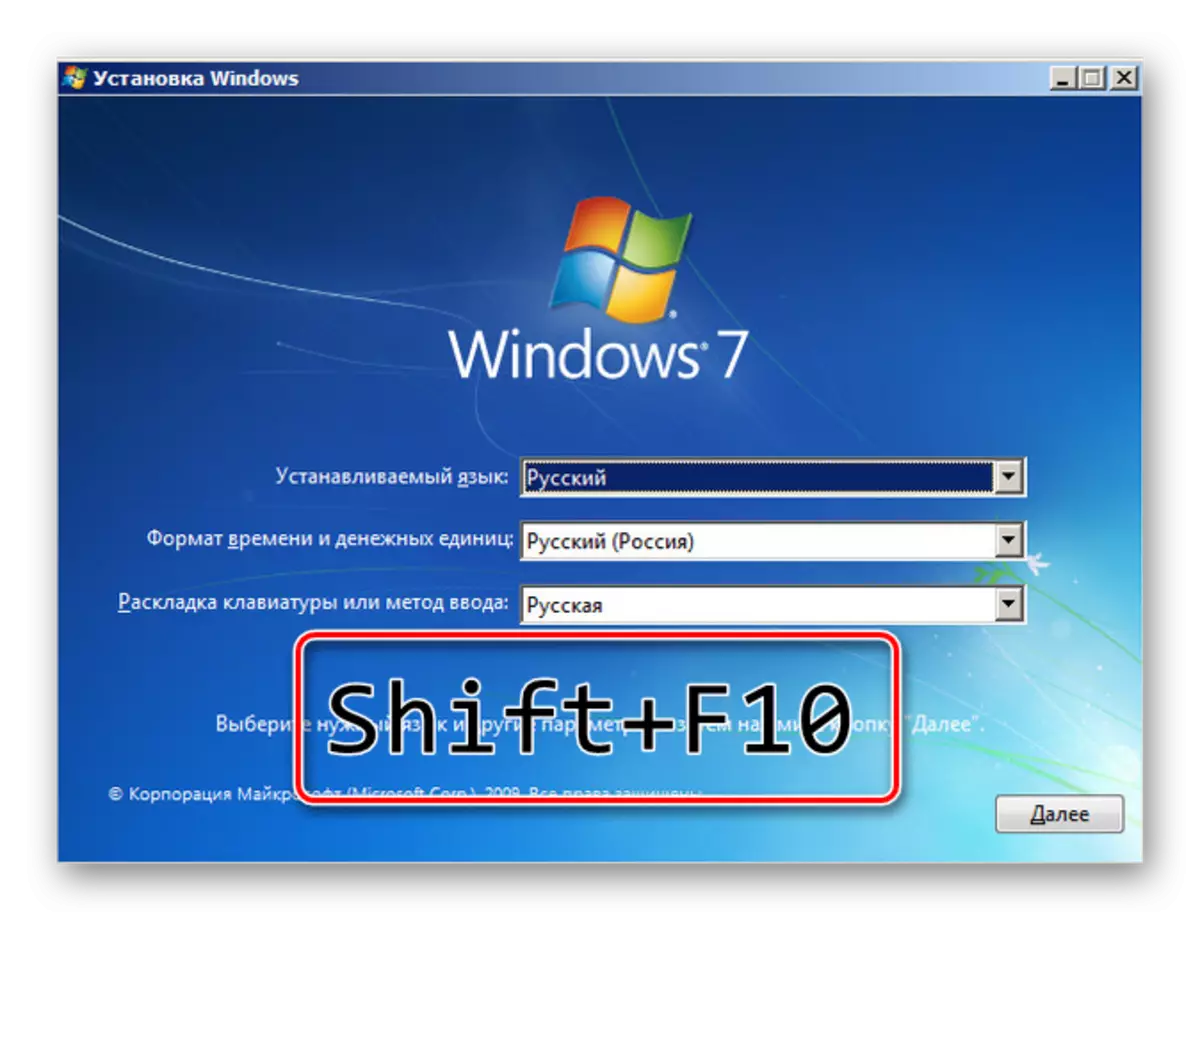 Switch to the command line when installing Windows 7